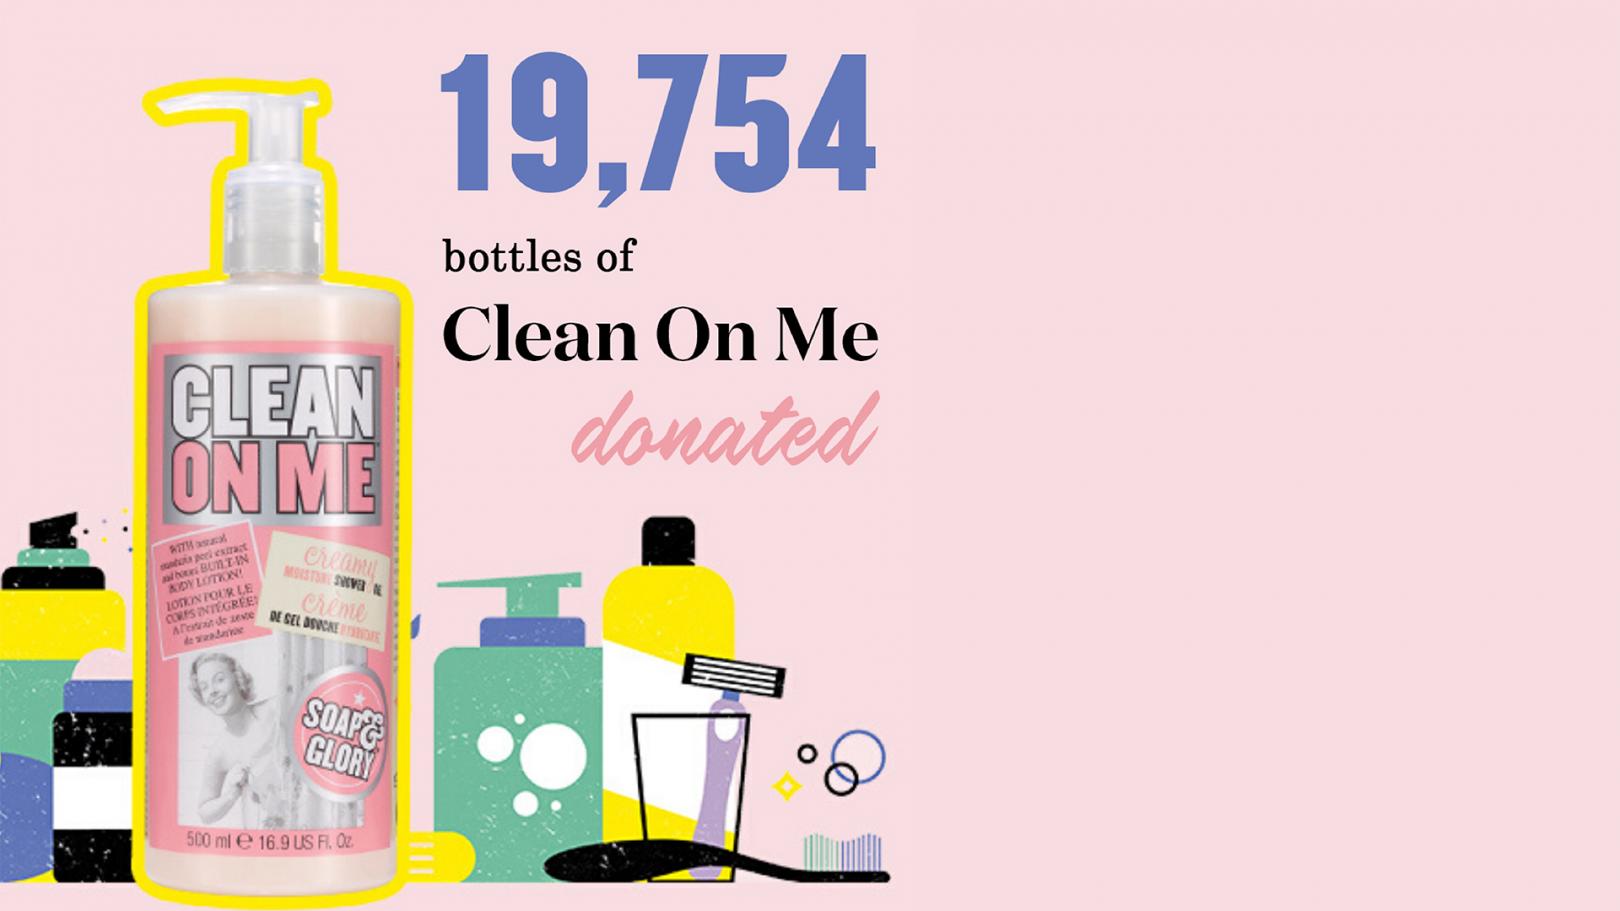 Soap and Glory infographic showing soap and glory products and the number 19,74 indicating the number of clean on bottles donated 